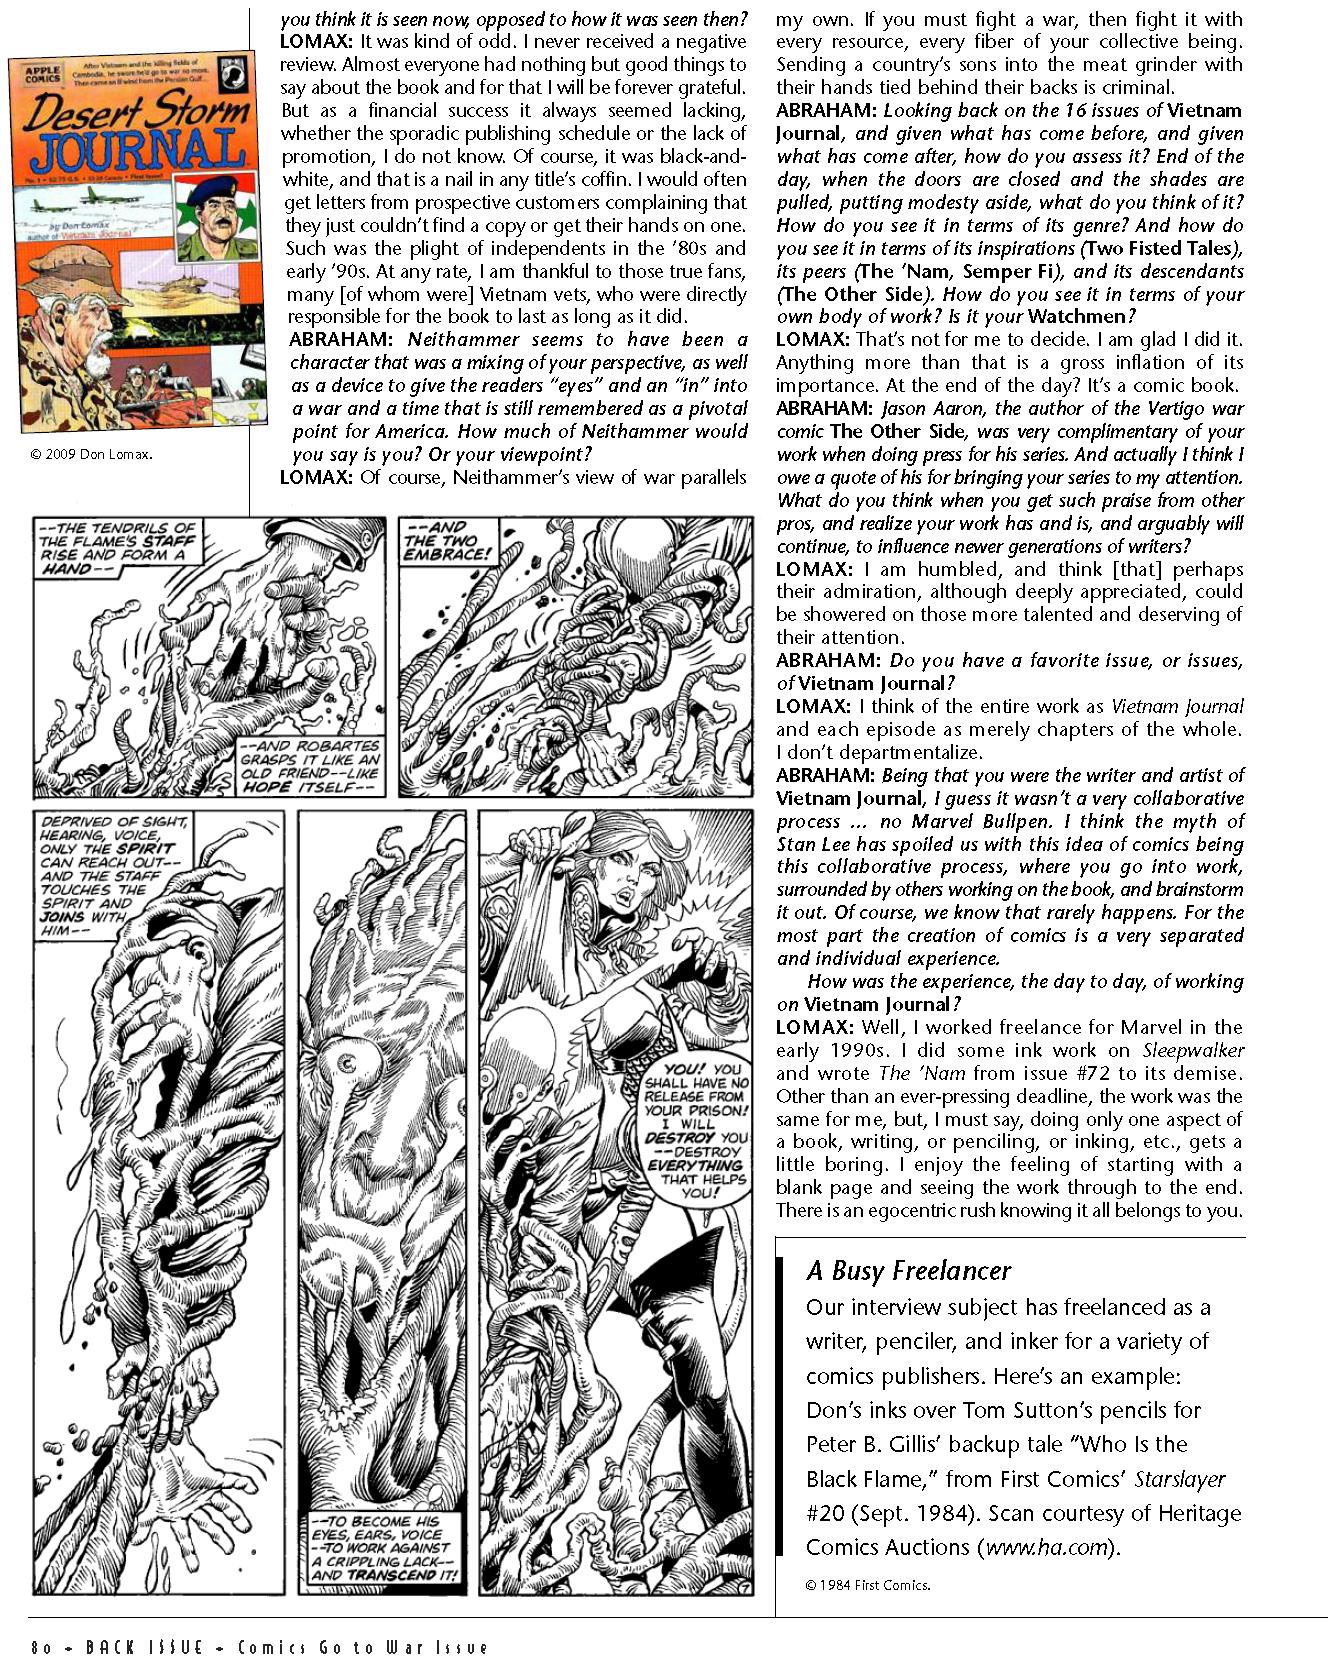 Read online Back Issue comic -  Issue #37 - 82